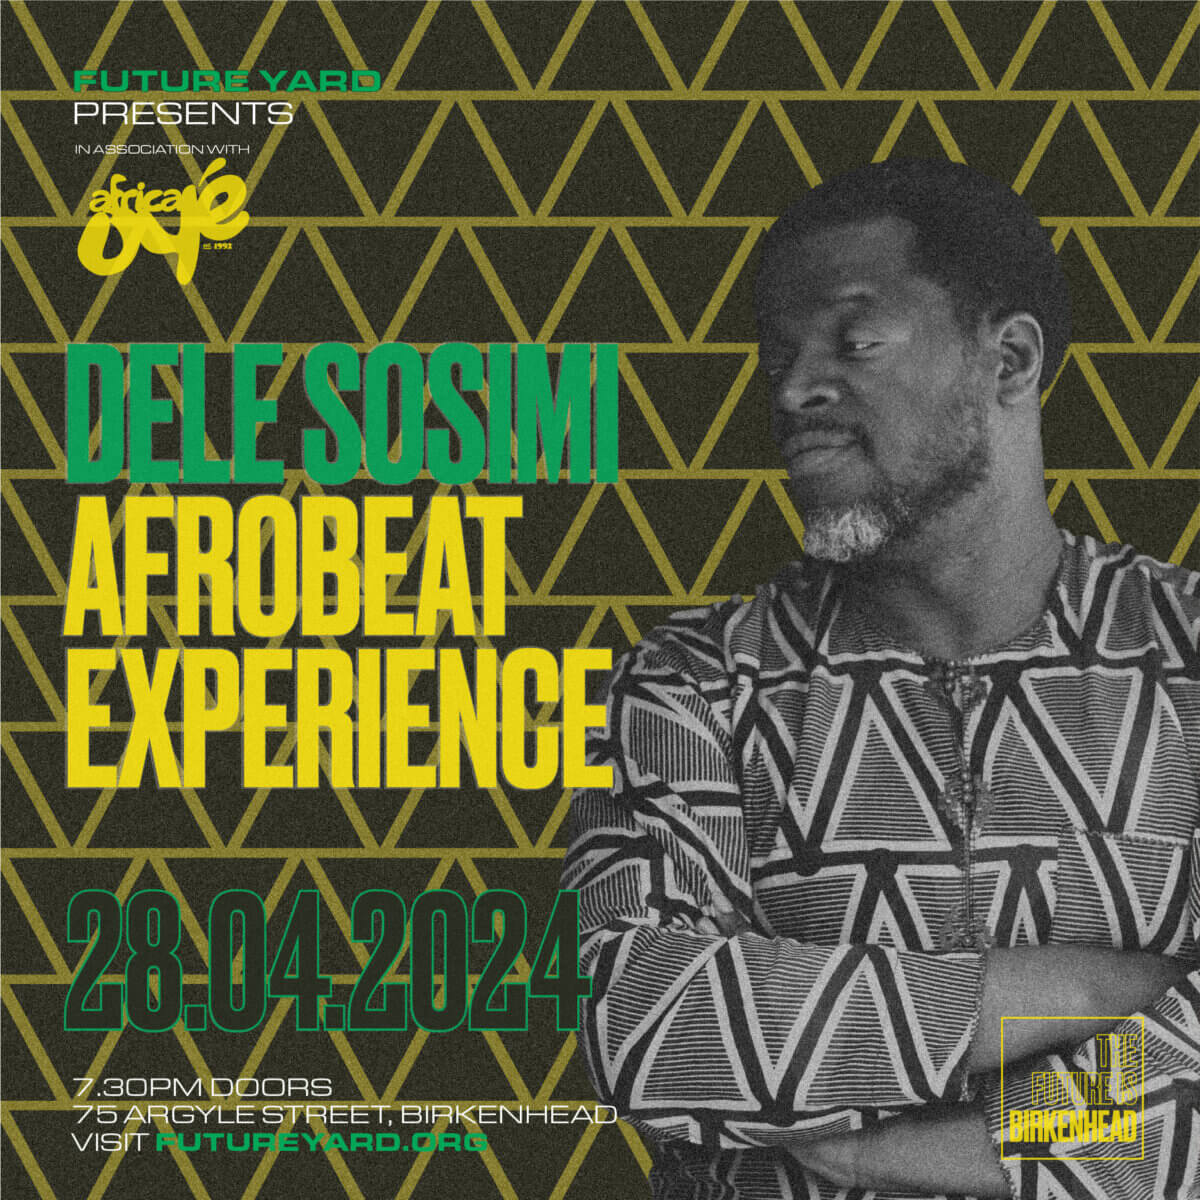 Text reads: "Future Yard presents, in association with Africa Oyé. Dele Sosimi Afrobeat Experience. 28th April 2024. 7:30pm Doors. 75 Argyle Street, Birkenhead. Visit futureyard.org"